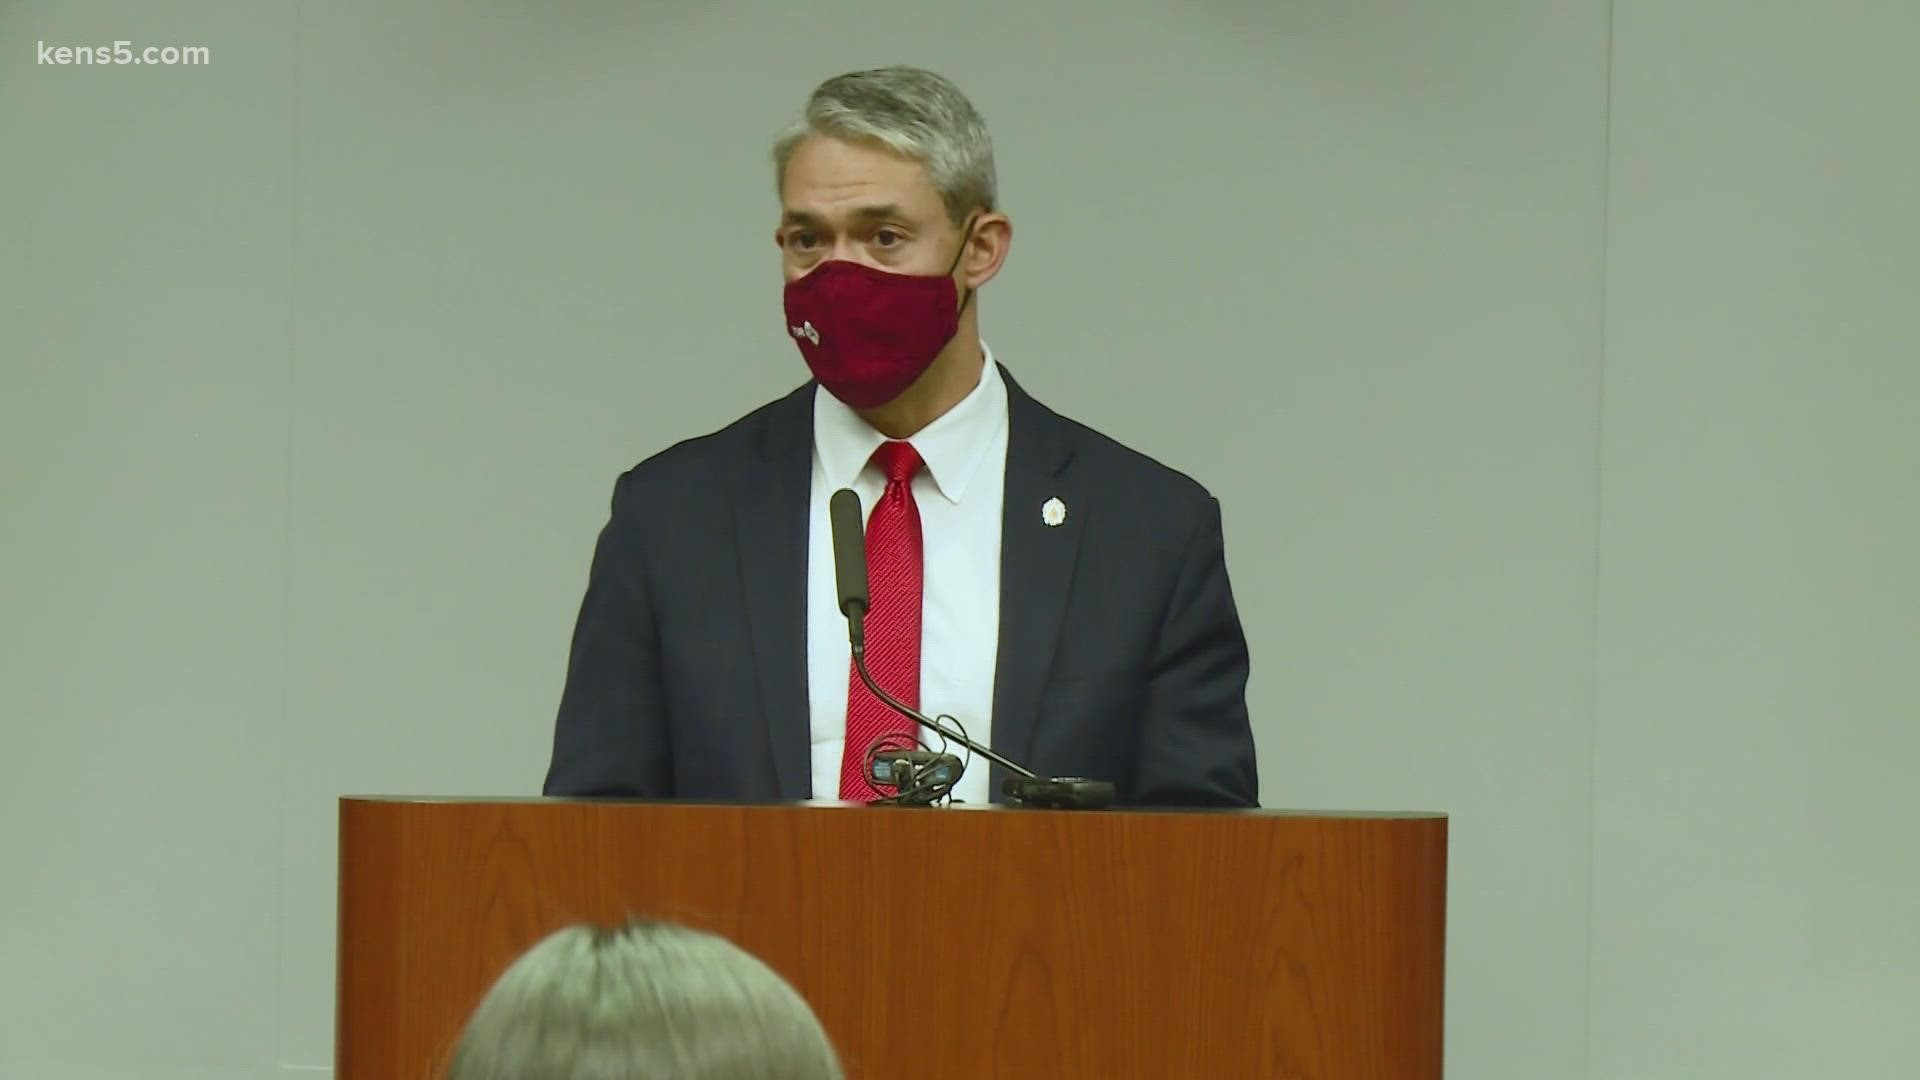 NEISD said it is following the guidance from the Texas Supreme Court, but SAISD is requiring masks and also requiring employees to get vaccinated.